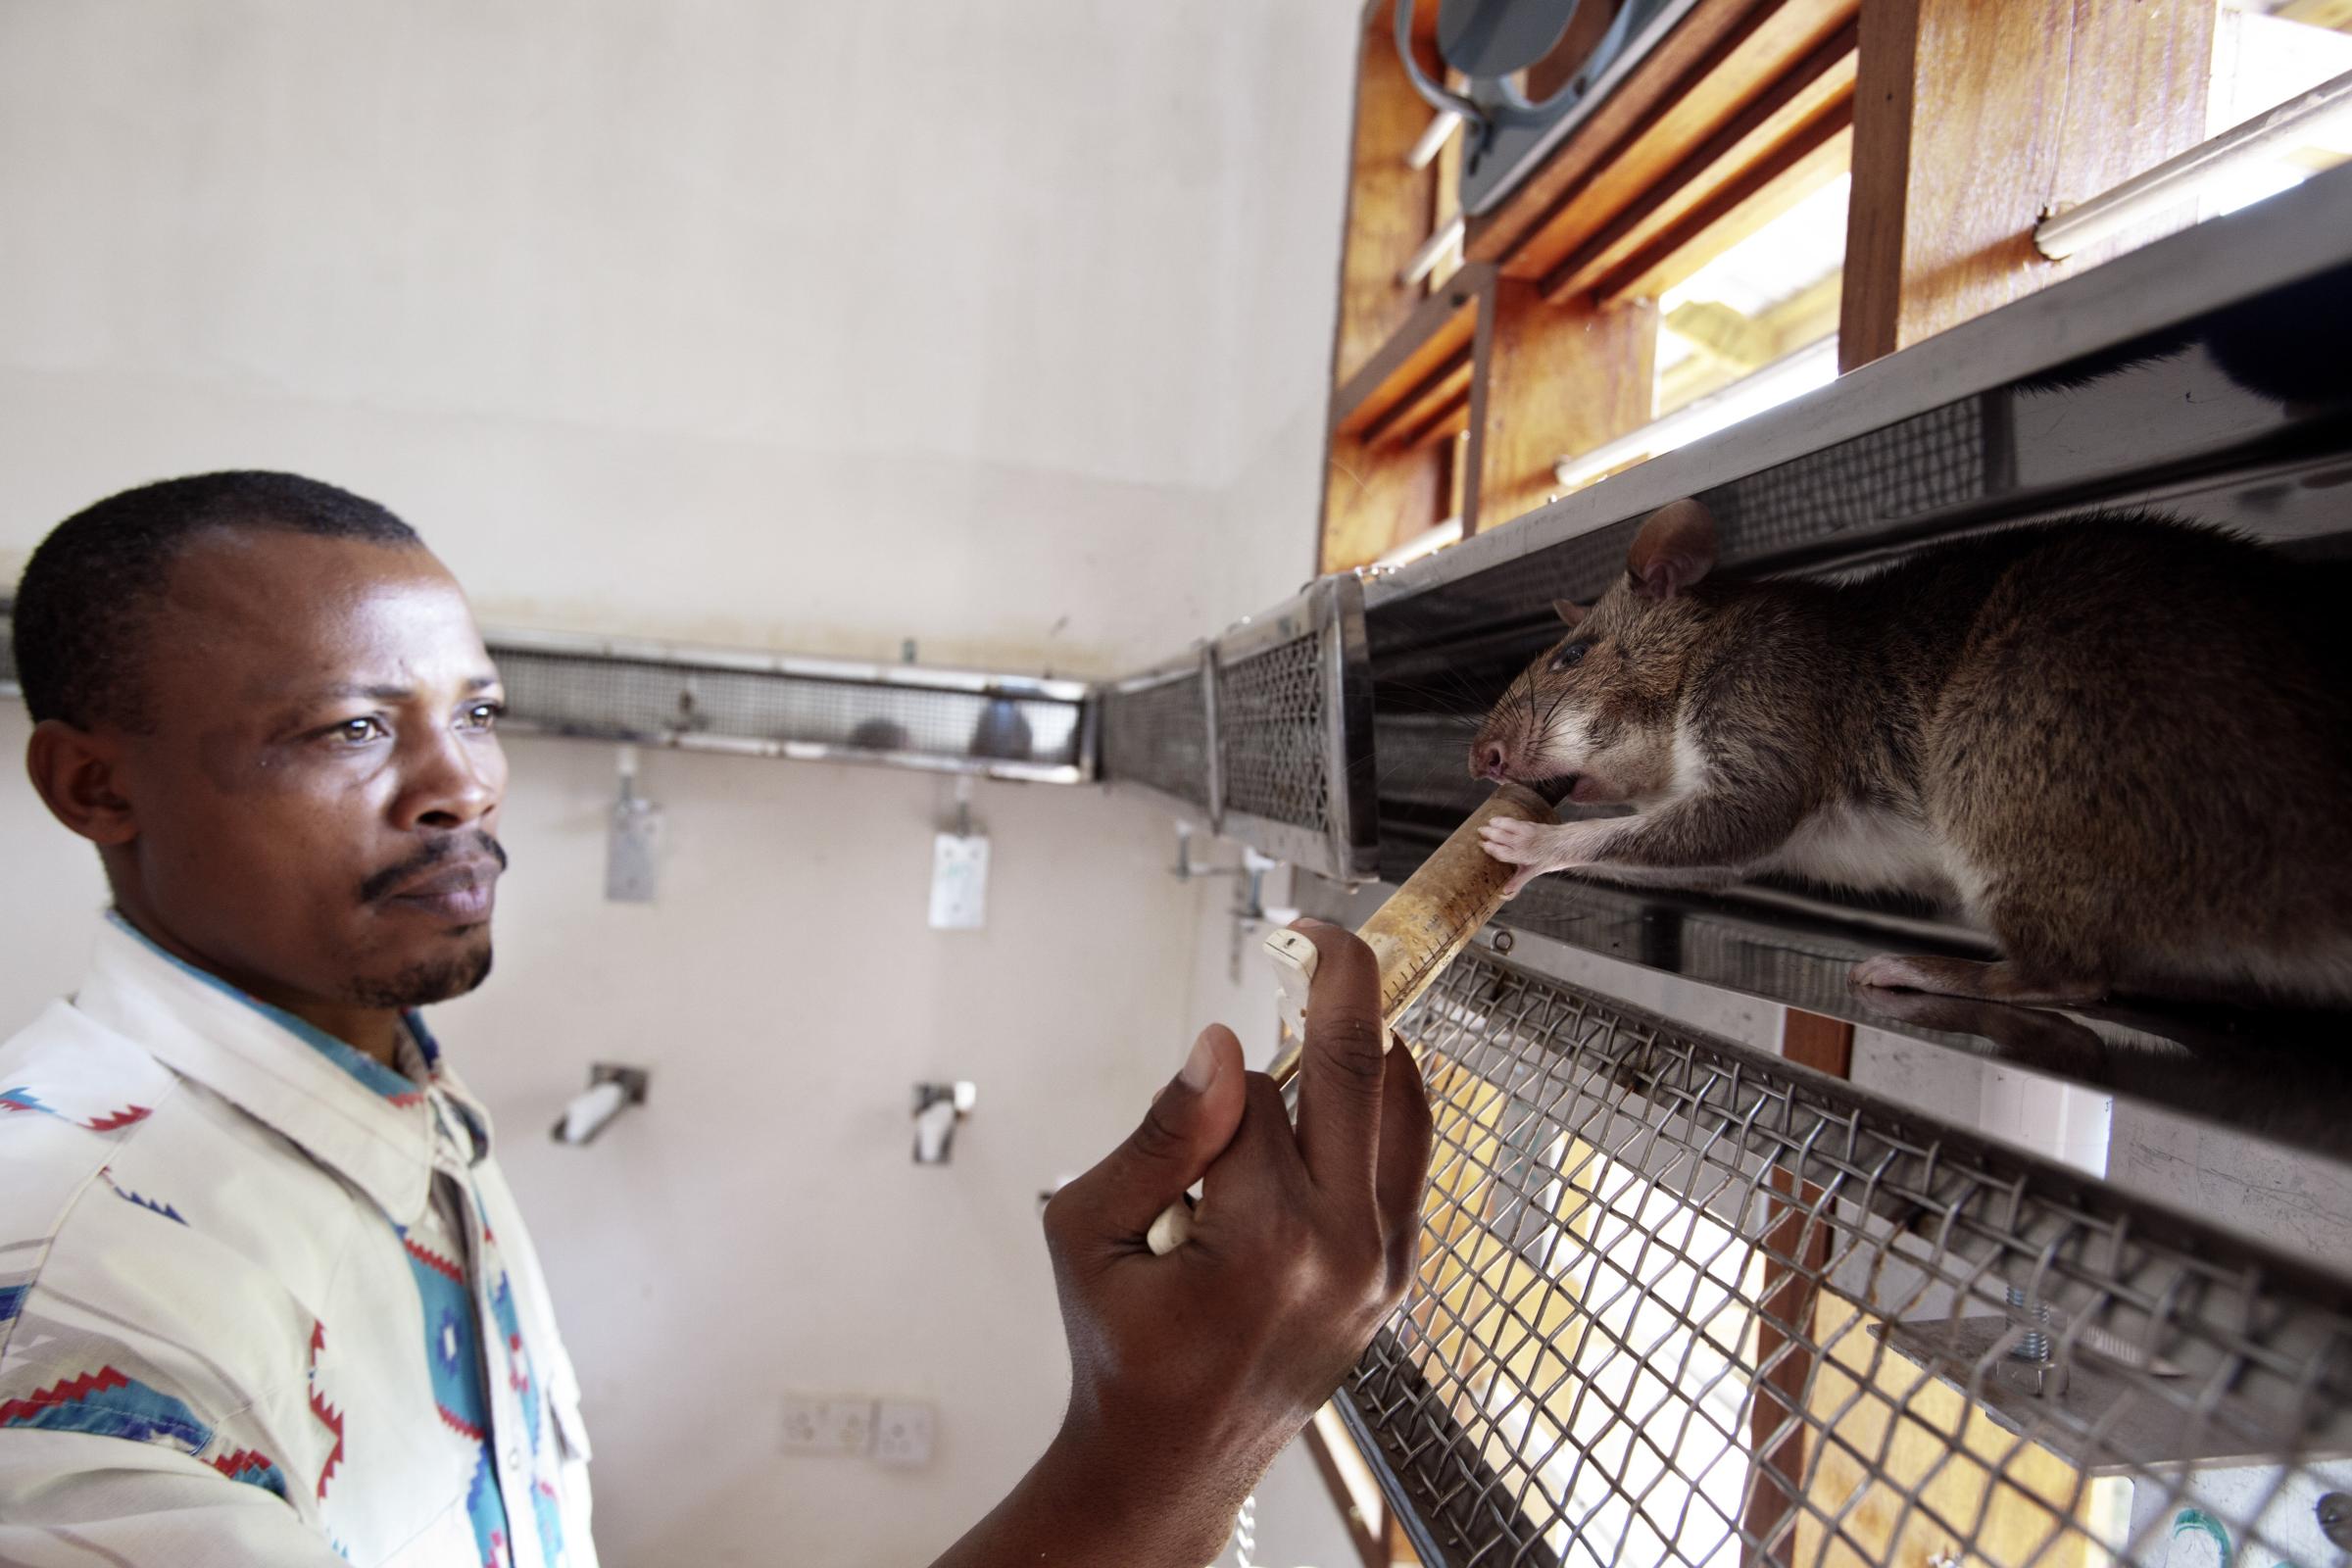 A coach gives pureed fruit to the rat in a corridor-shaped cage on June 20, 2014 in Morogoro, Tanzania. . The rat is being trained to detect TNT inside the cage. The rat stops walking when it has located the sample that contains TNT and is rewarded with the fruit.